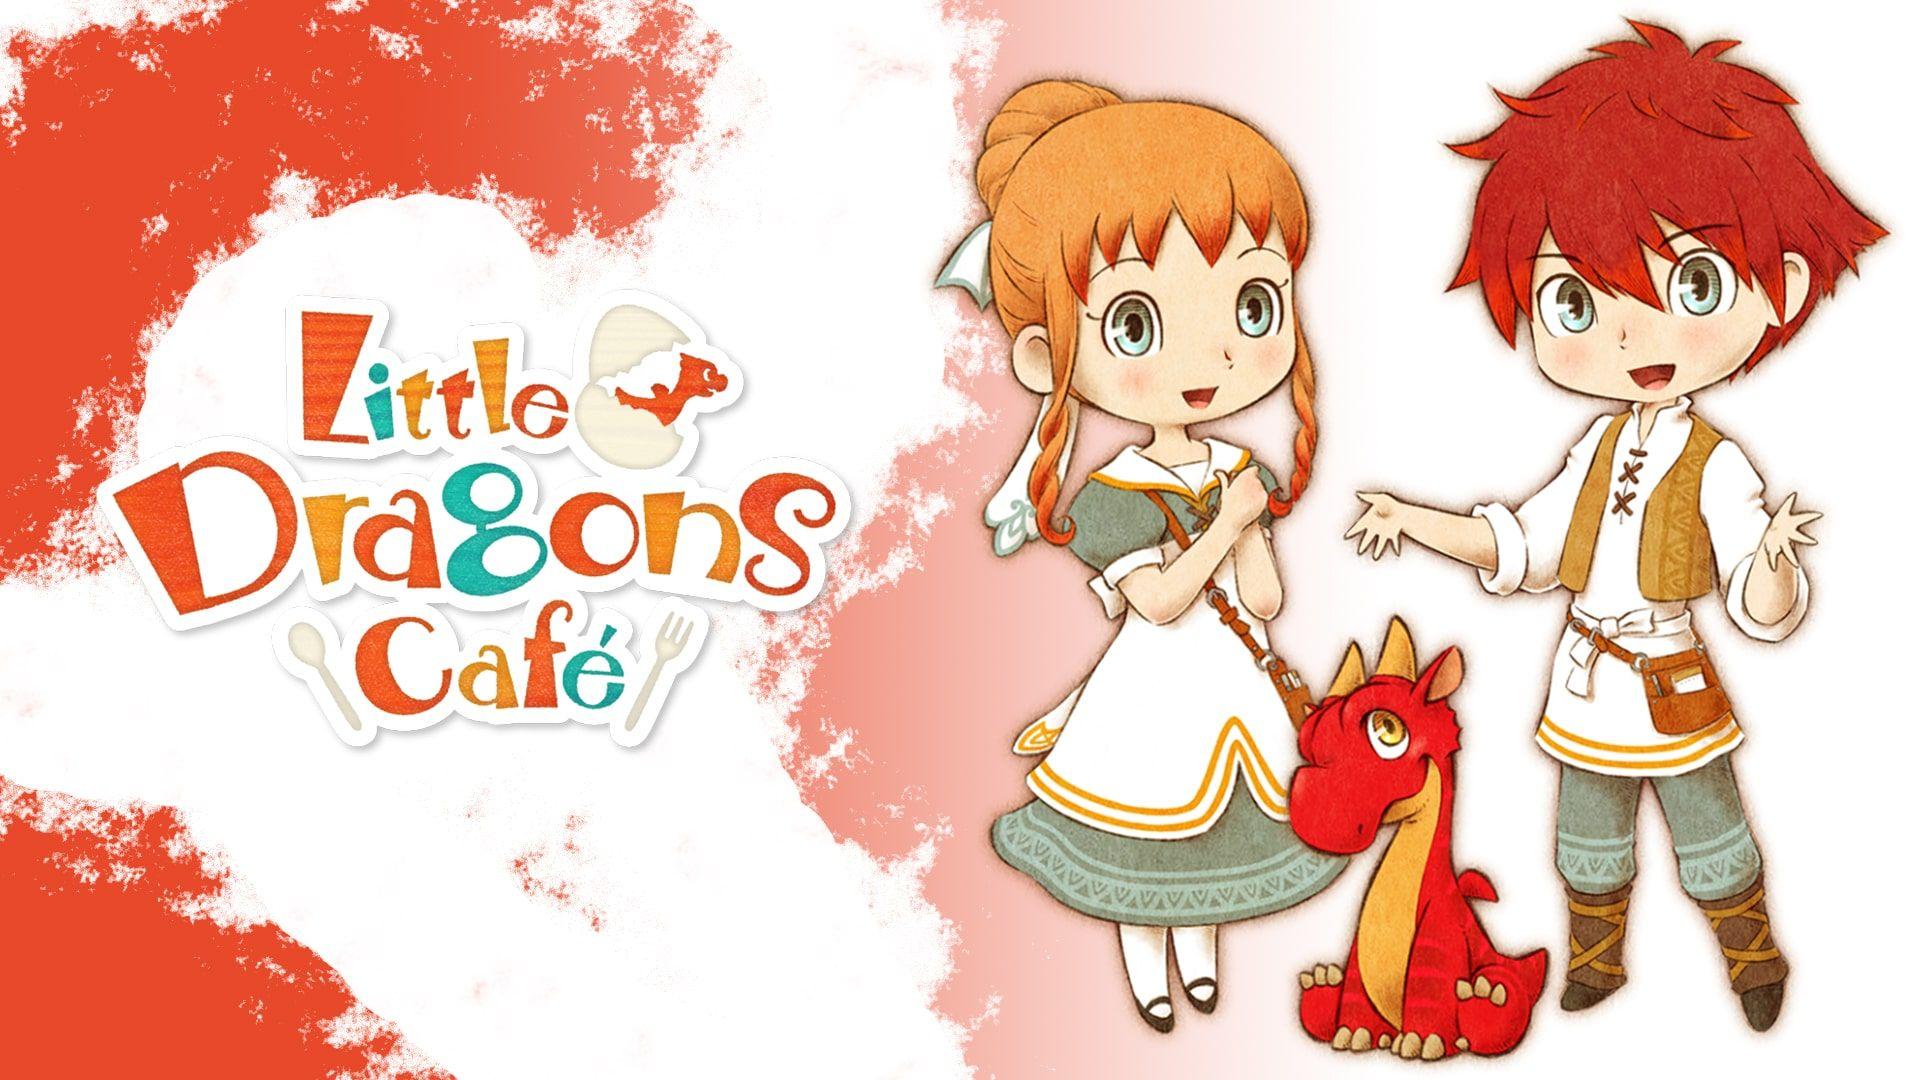 Little Dragons Cafe footage